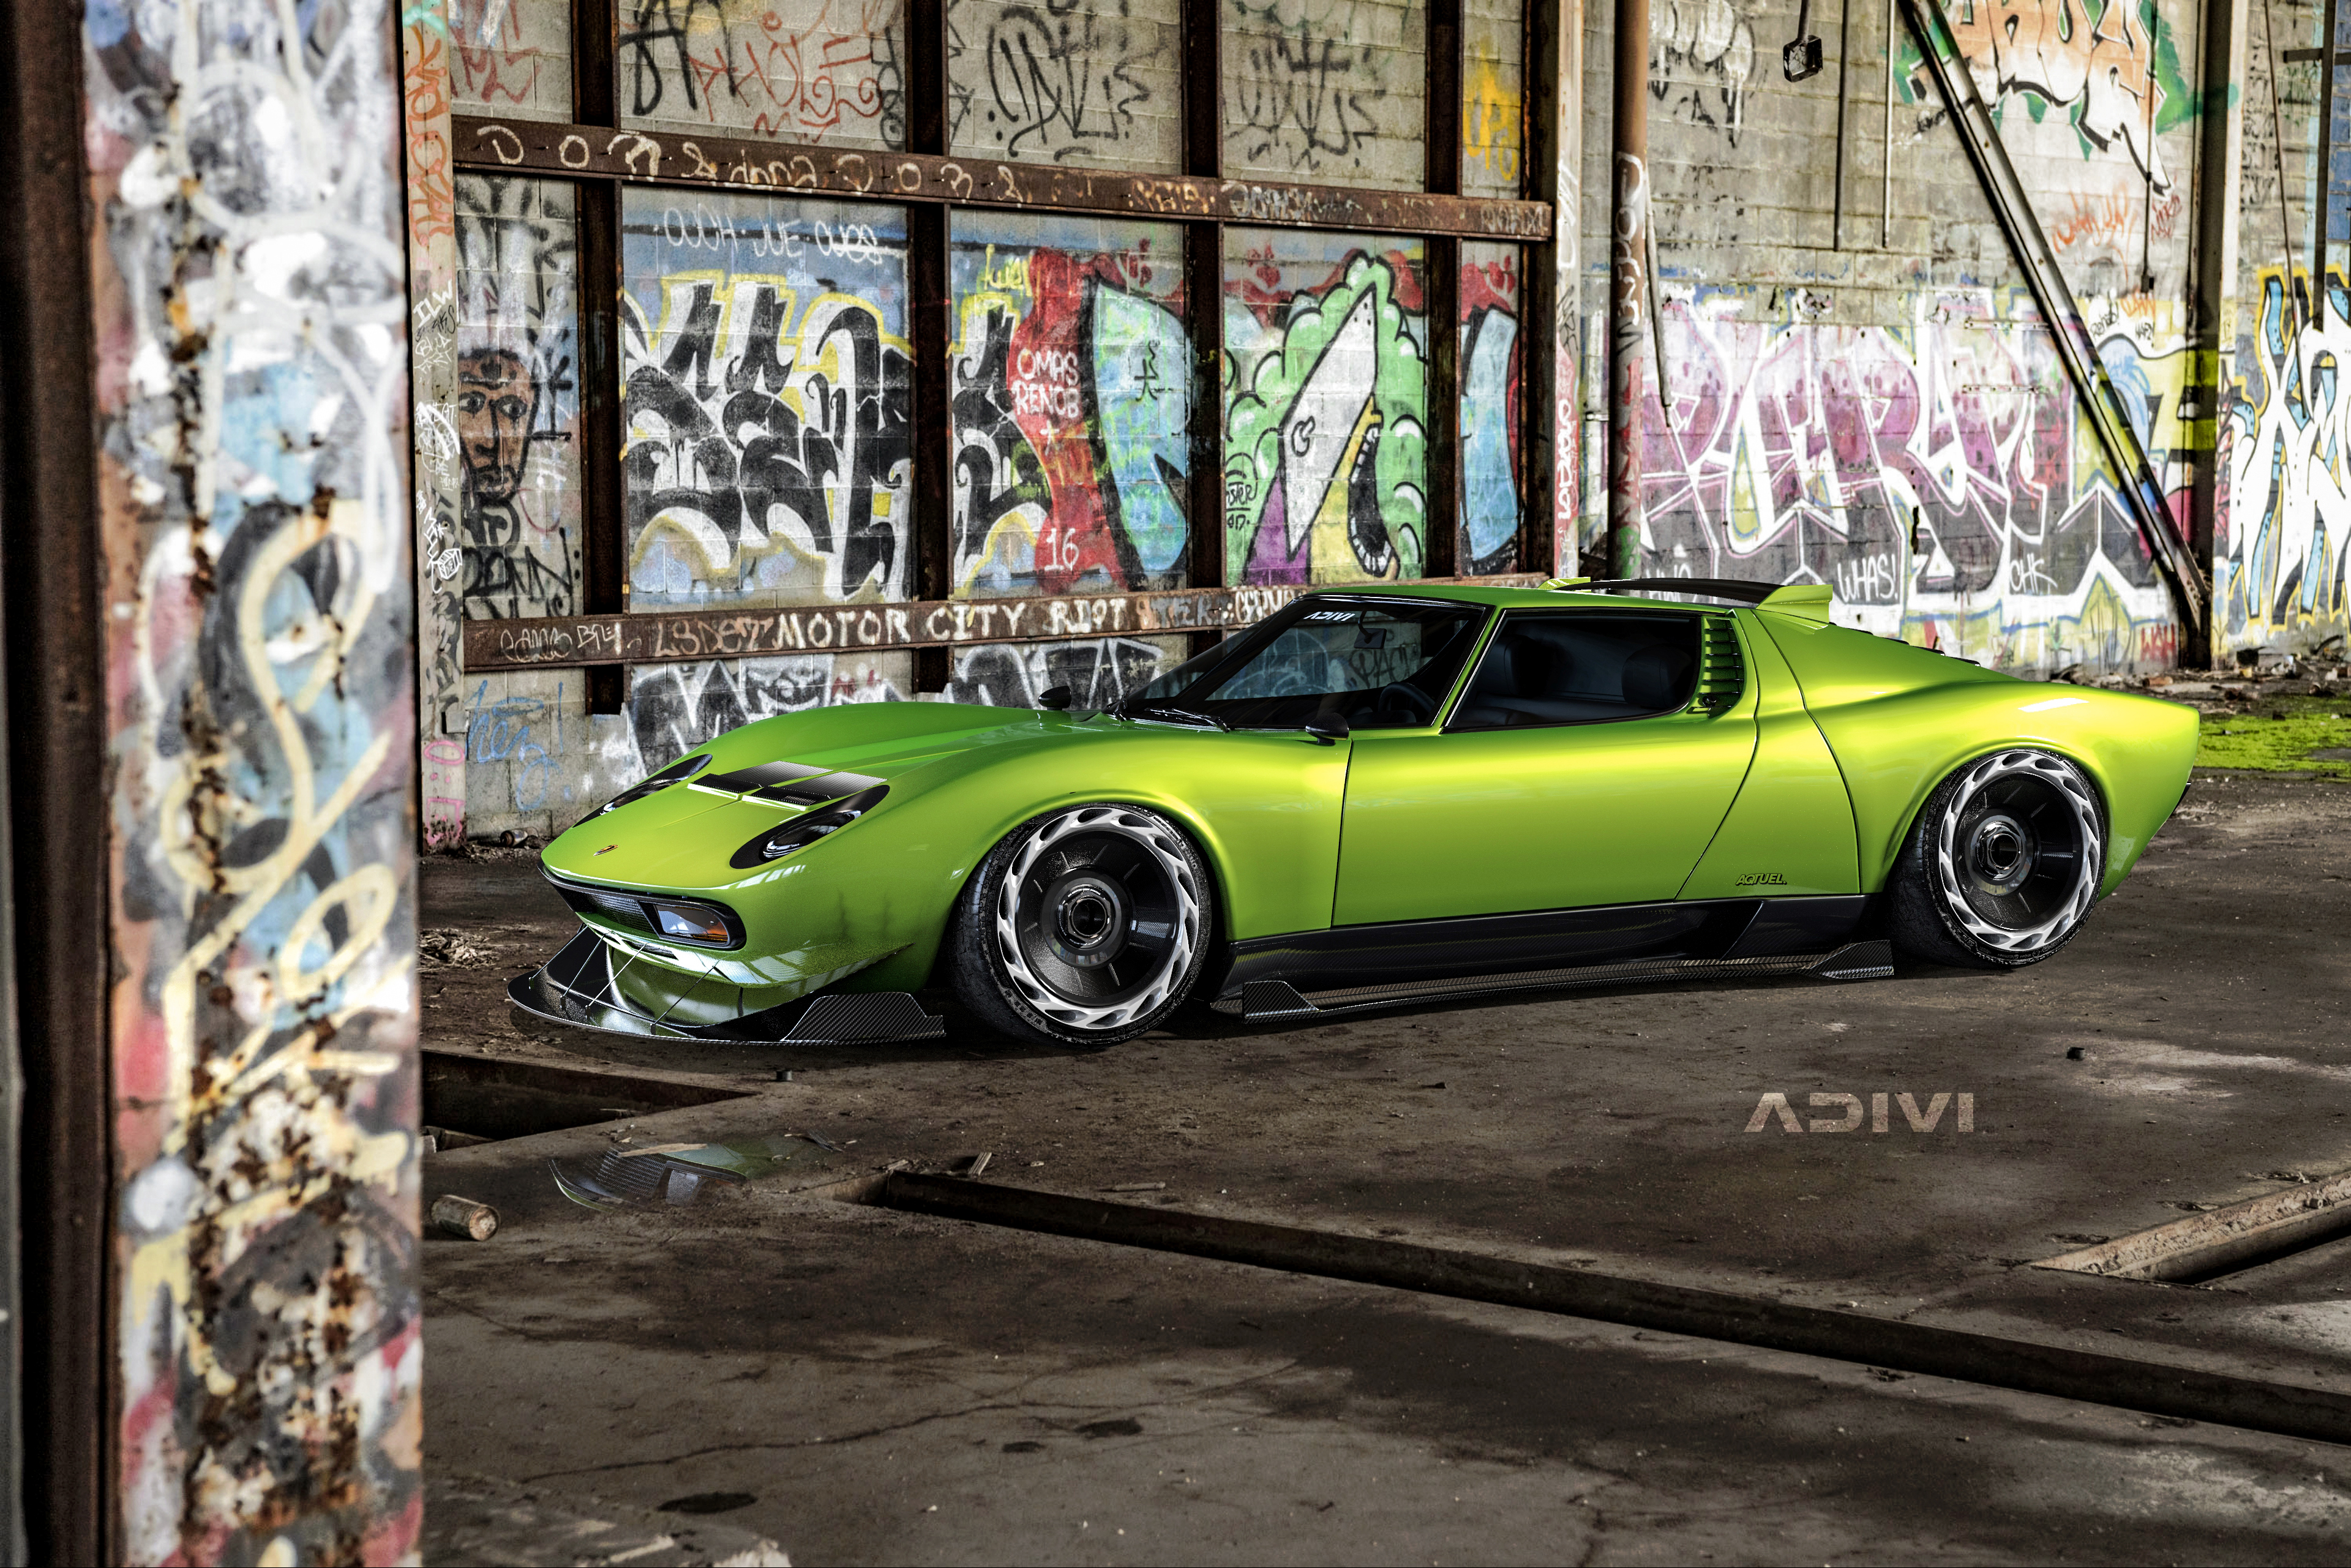 A saloon-colored Lamborghini Miura stands in a hangar with painted walls